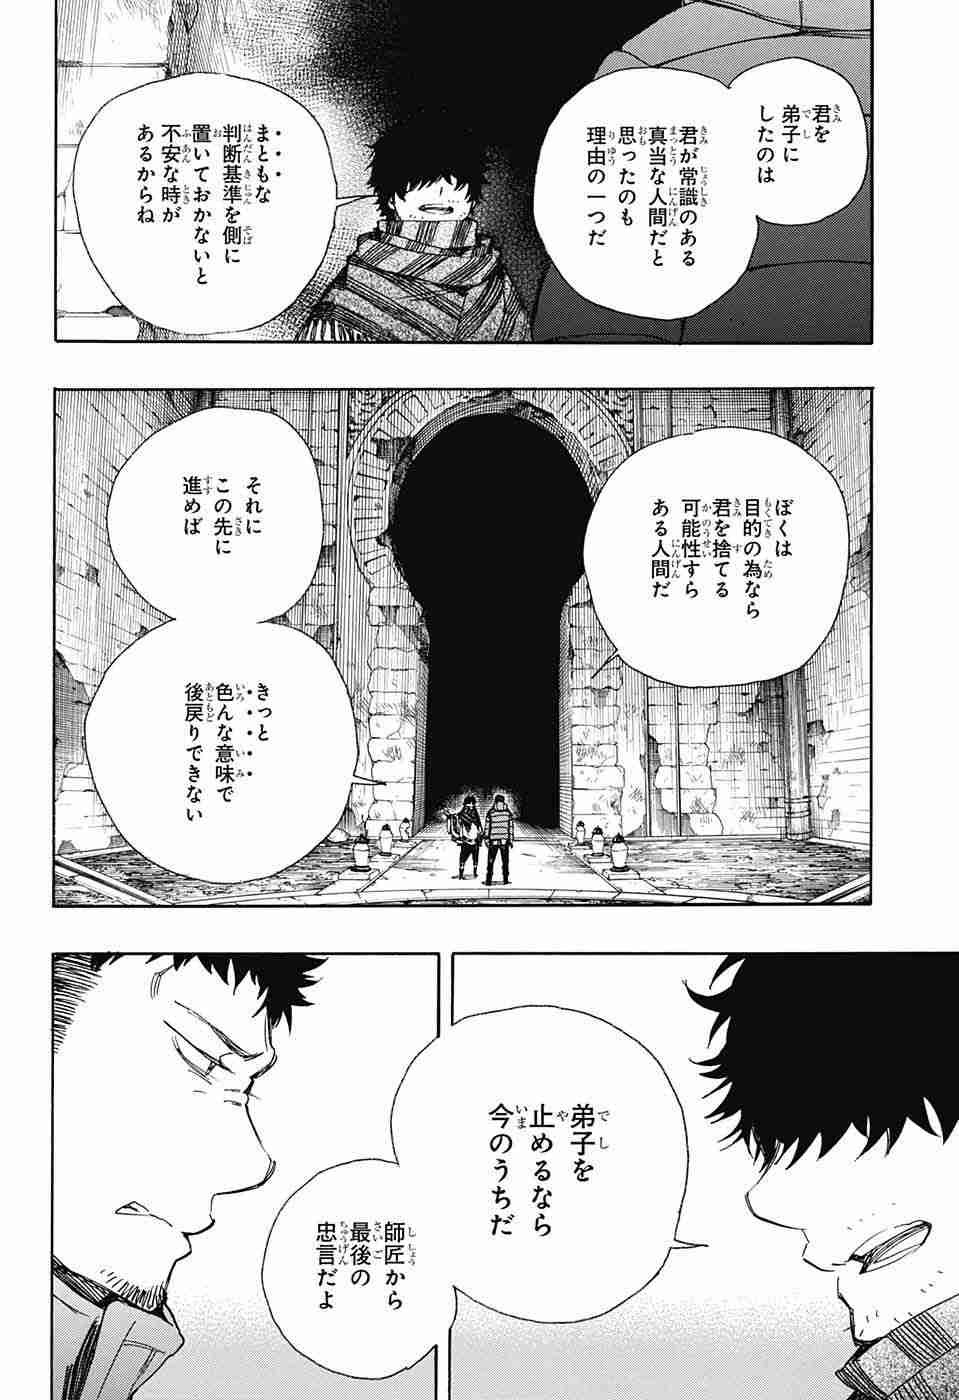 Ao no Exorcist - Chapter 84 - Page 32